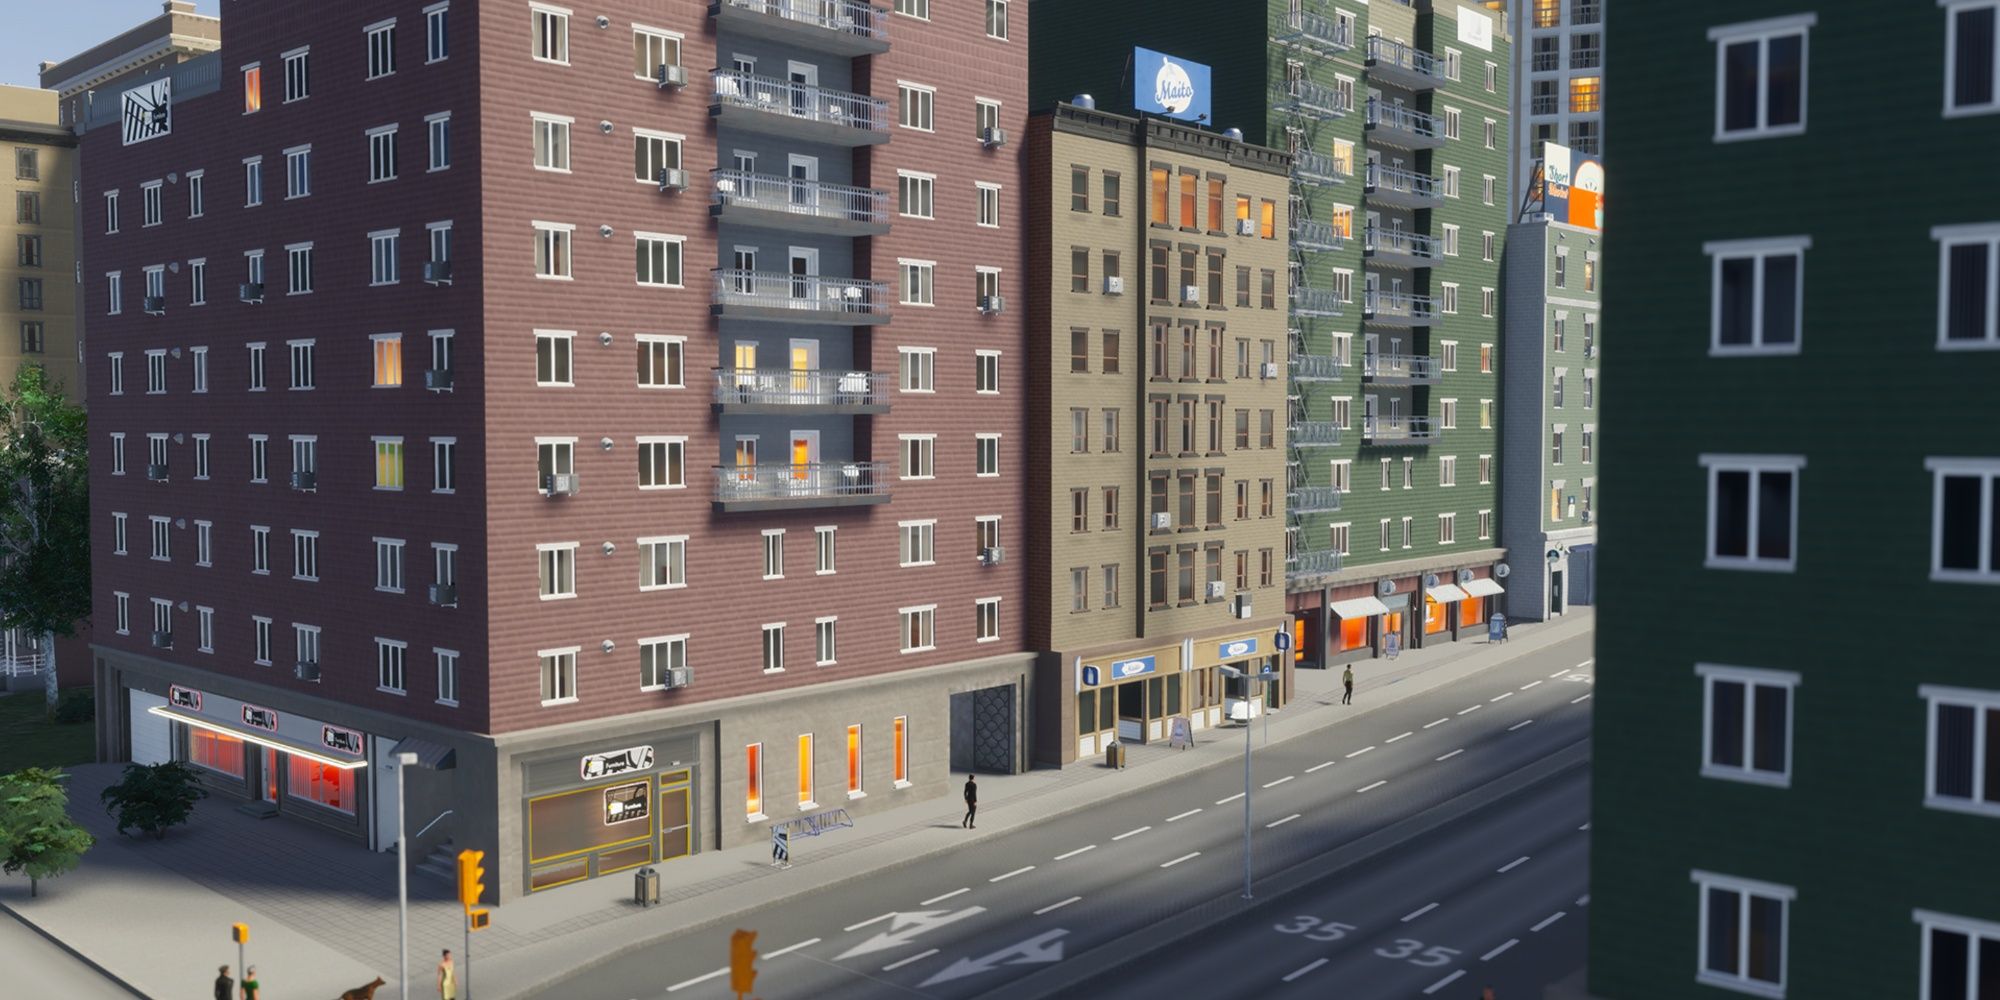 Residential area in Cities: Skylines 2